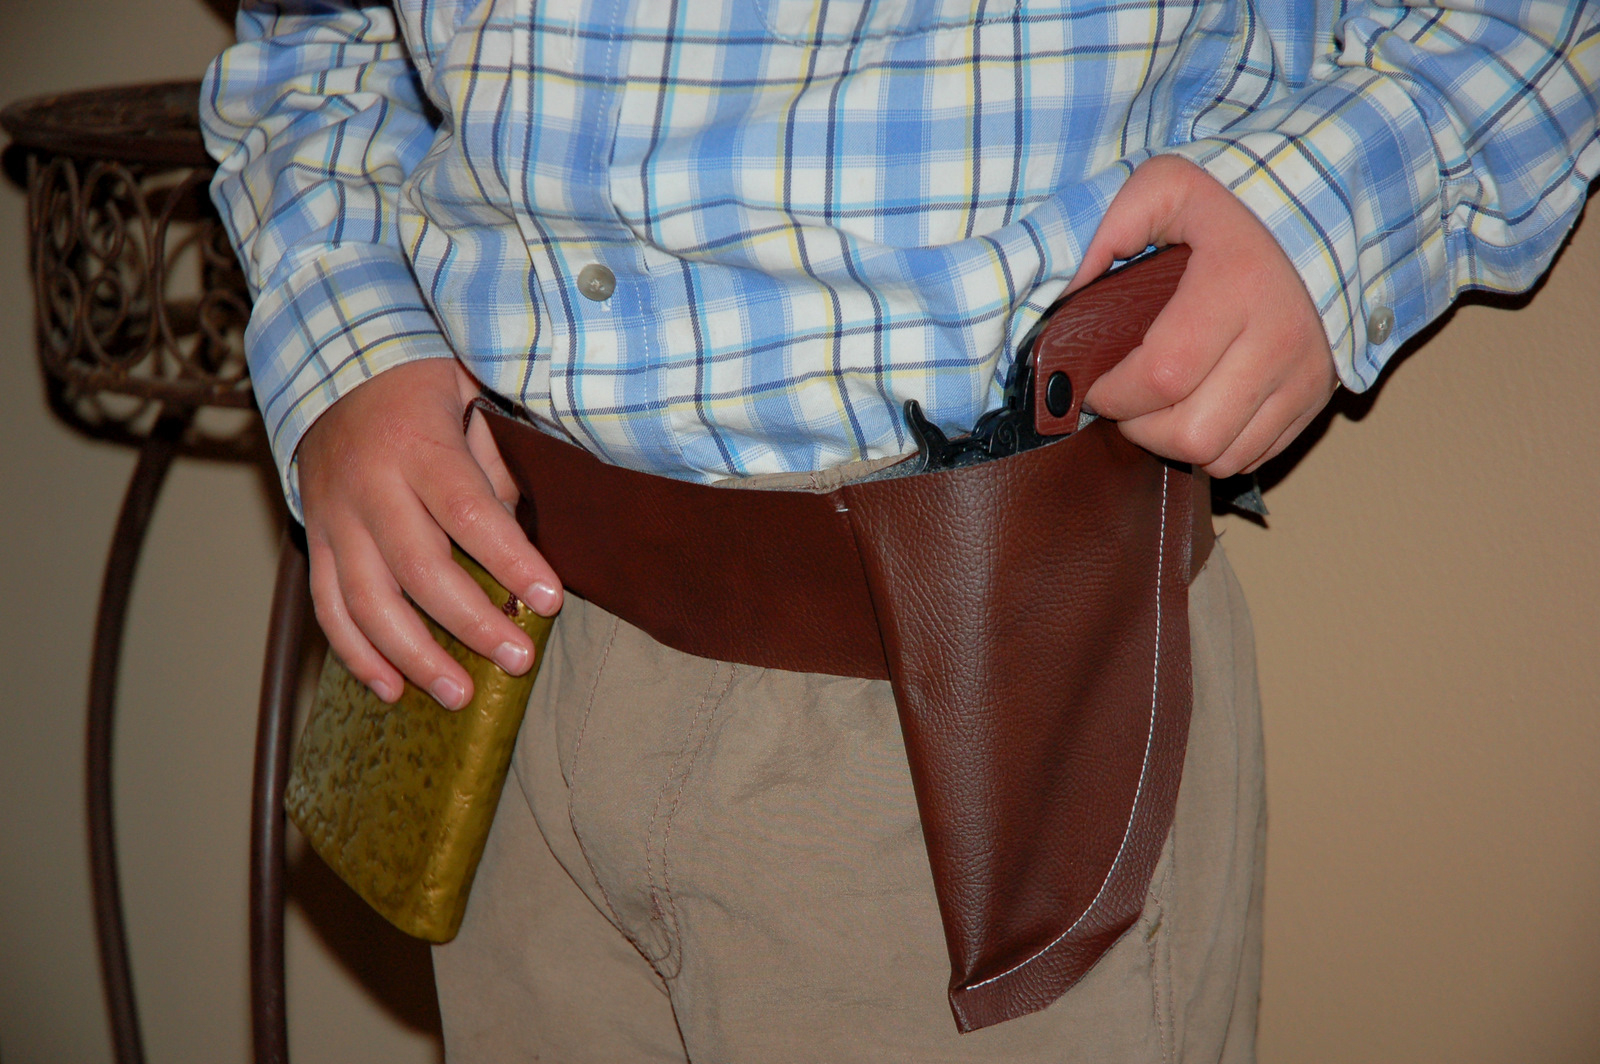 Restlessrisa: Cowboy Birthday Party Preparation {Part 1 - The Holster} - Free Printable Holster Patterns